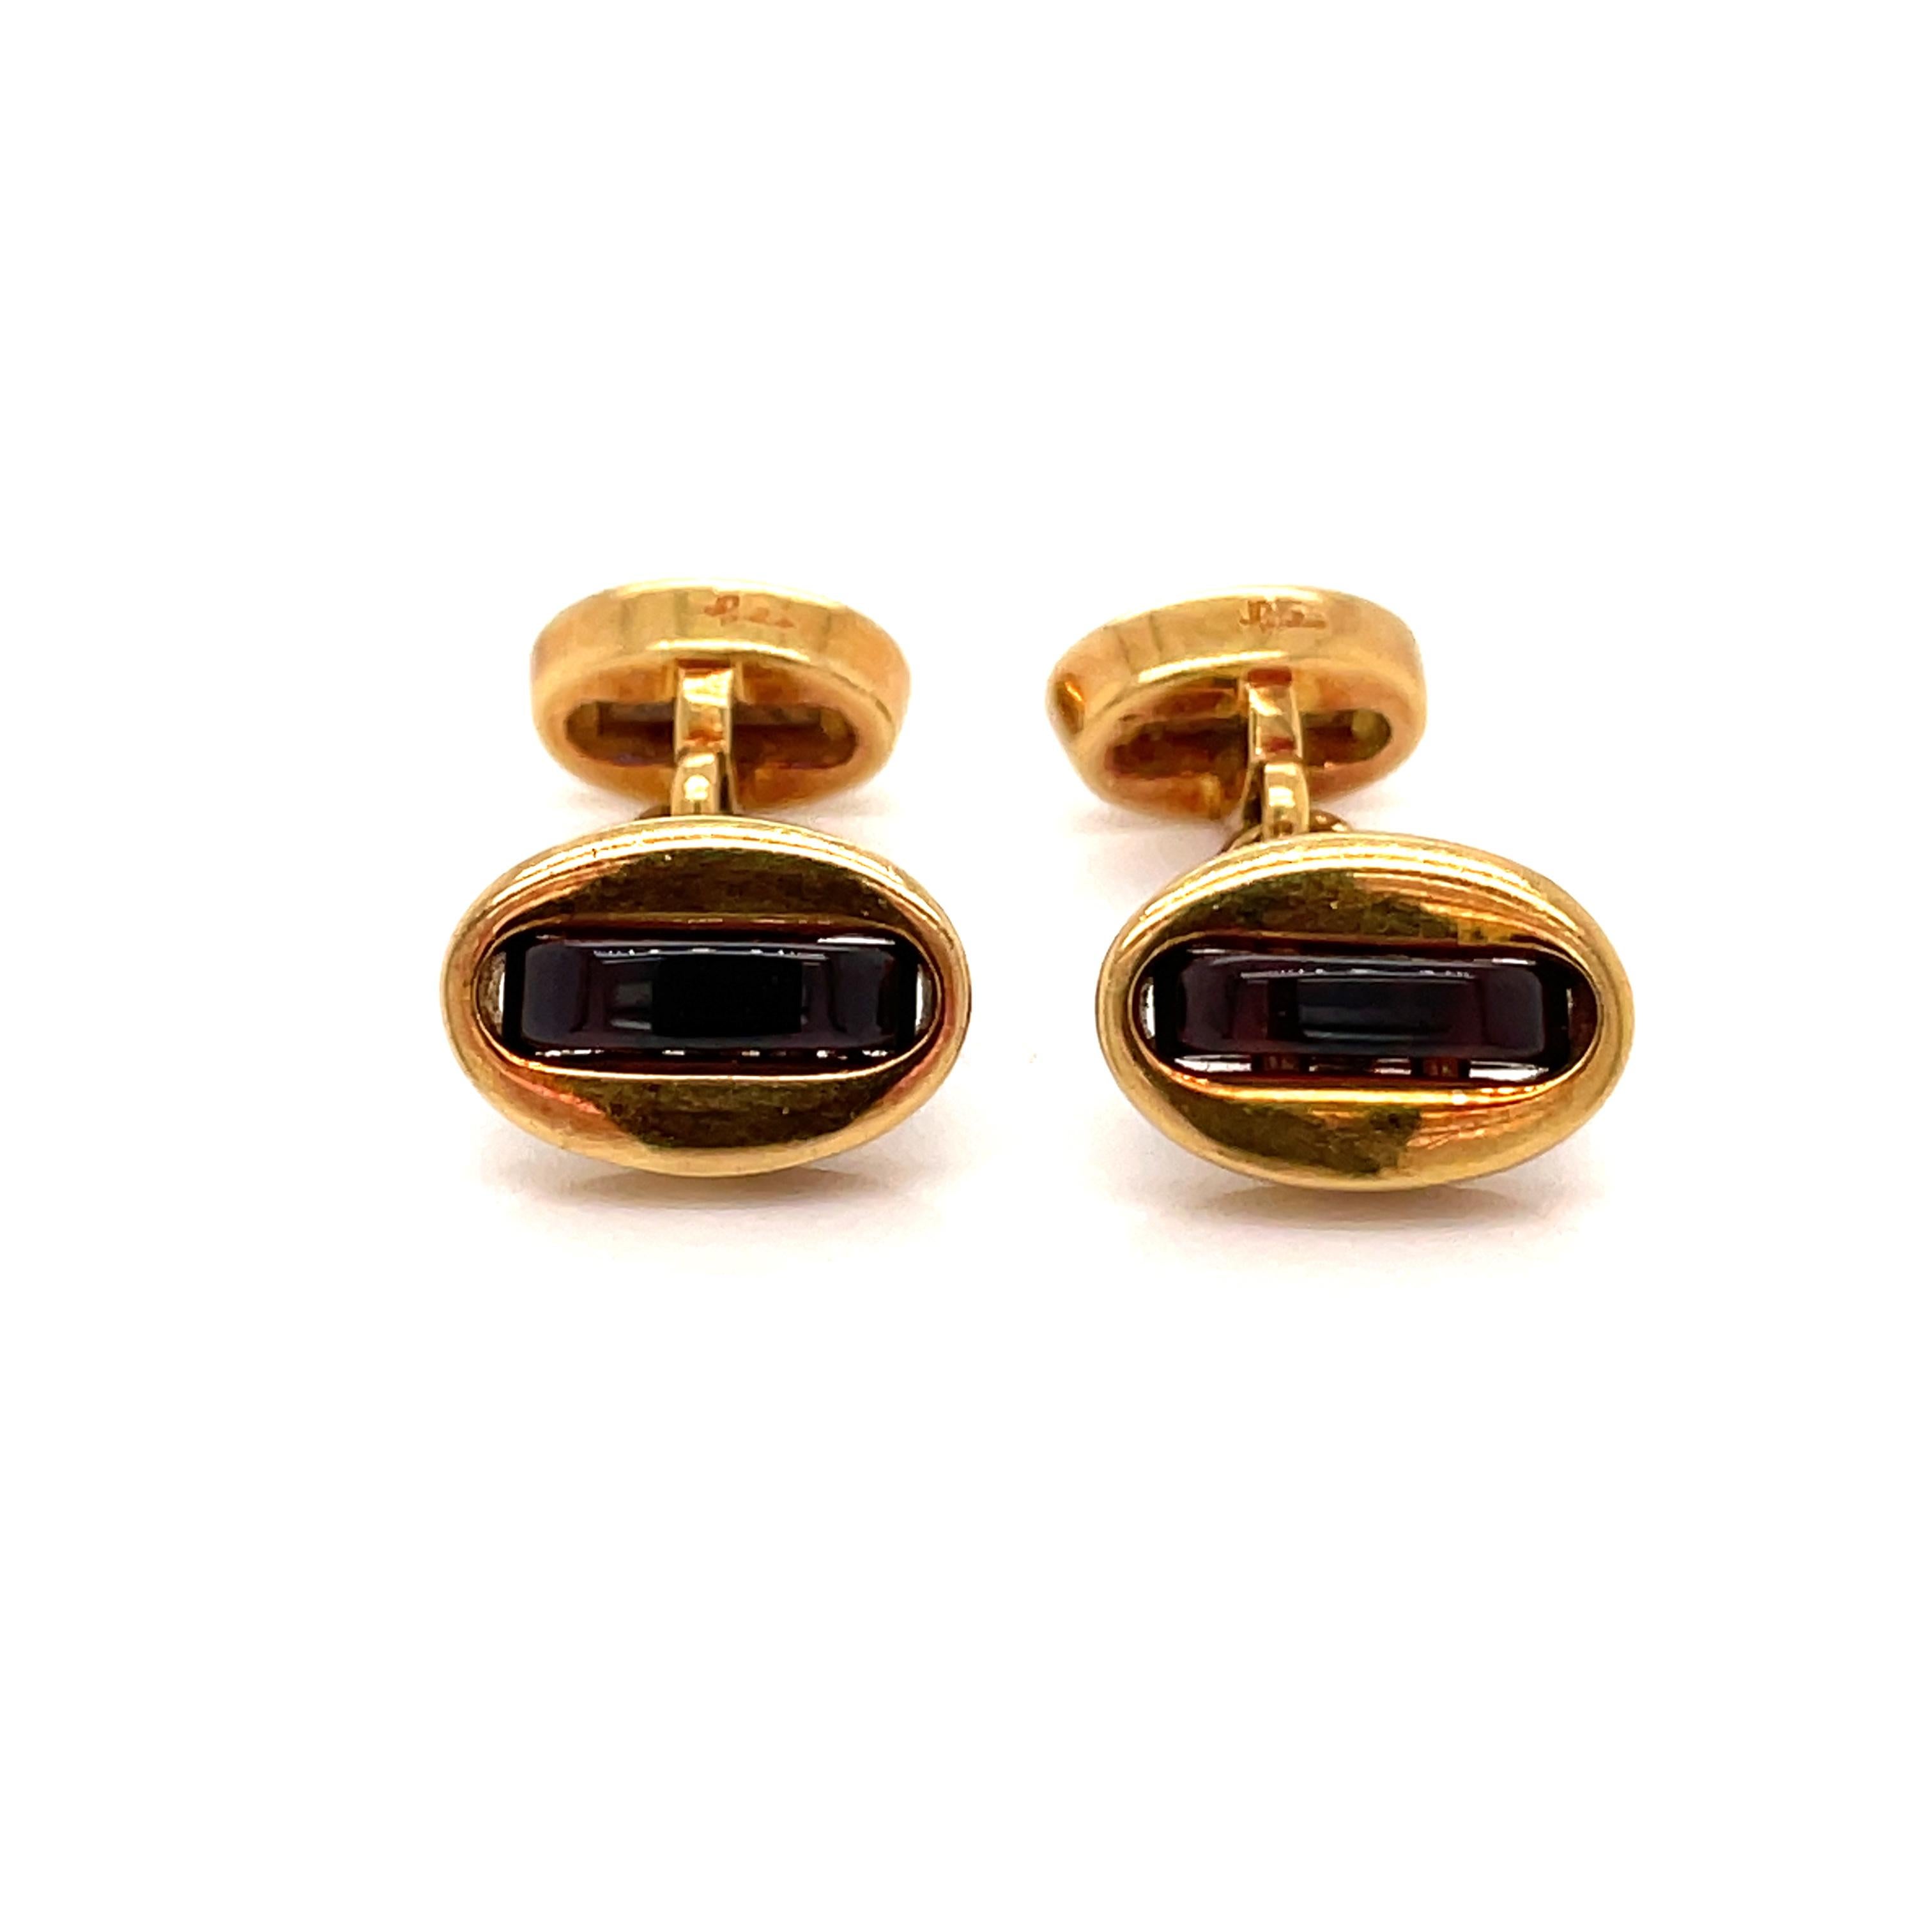 Nice vintage Italian Pomellato Cufflinks, made of solid 18k yellow gold and set with Carnelians

Metal: 18k yellow gold
Signature: Pomellato
Gross Weight: 15 grams

Excellent condition, 100% authenticity guarantee